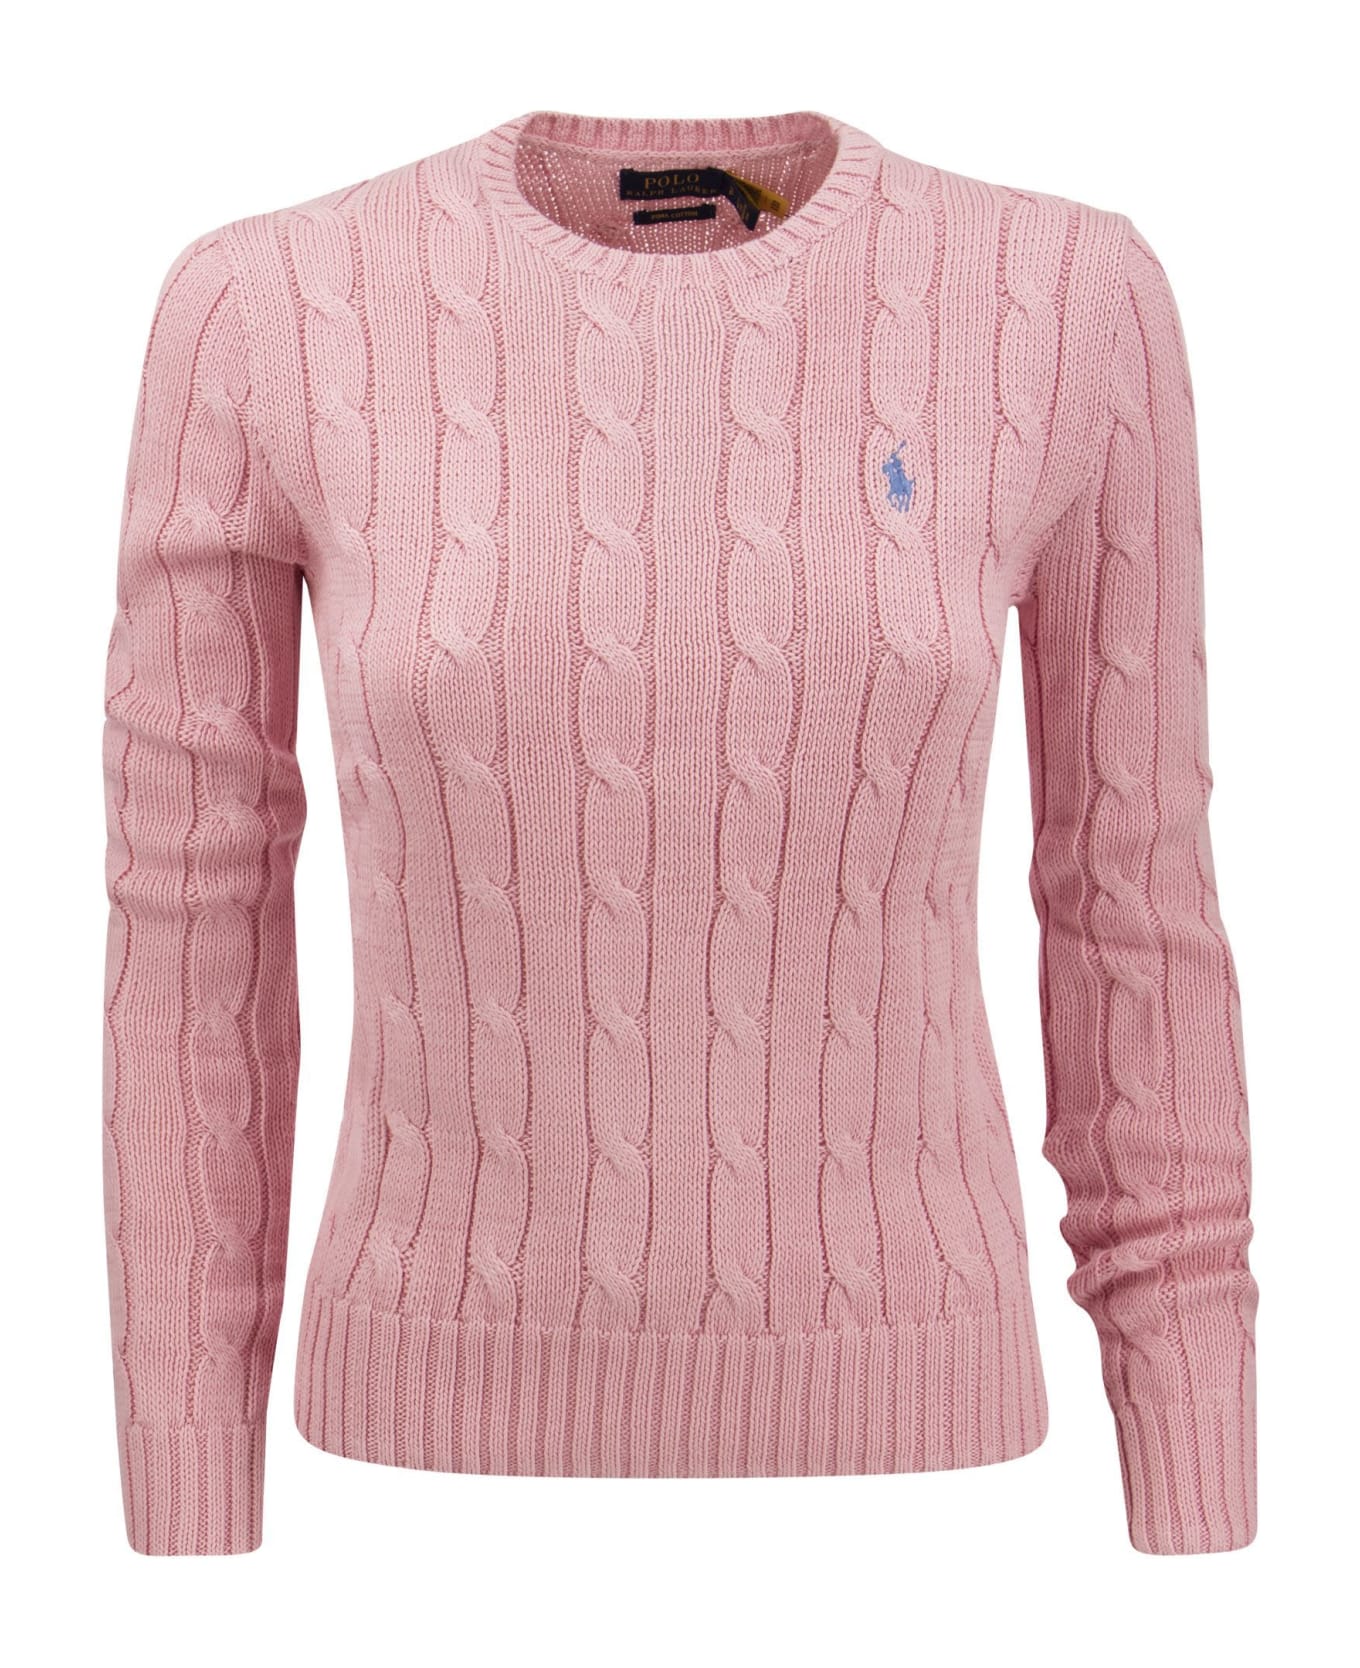 Polo Ralph Lauren Sweater With Pony - Pink ニットウェア